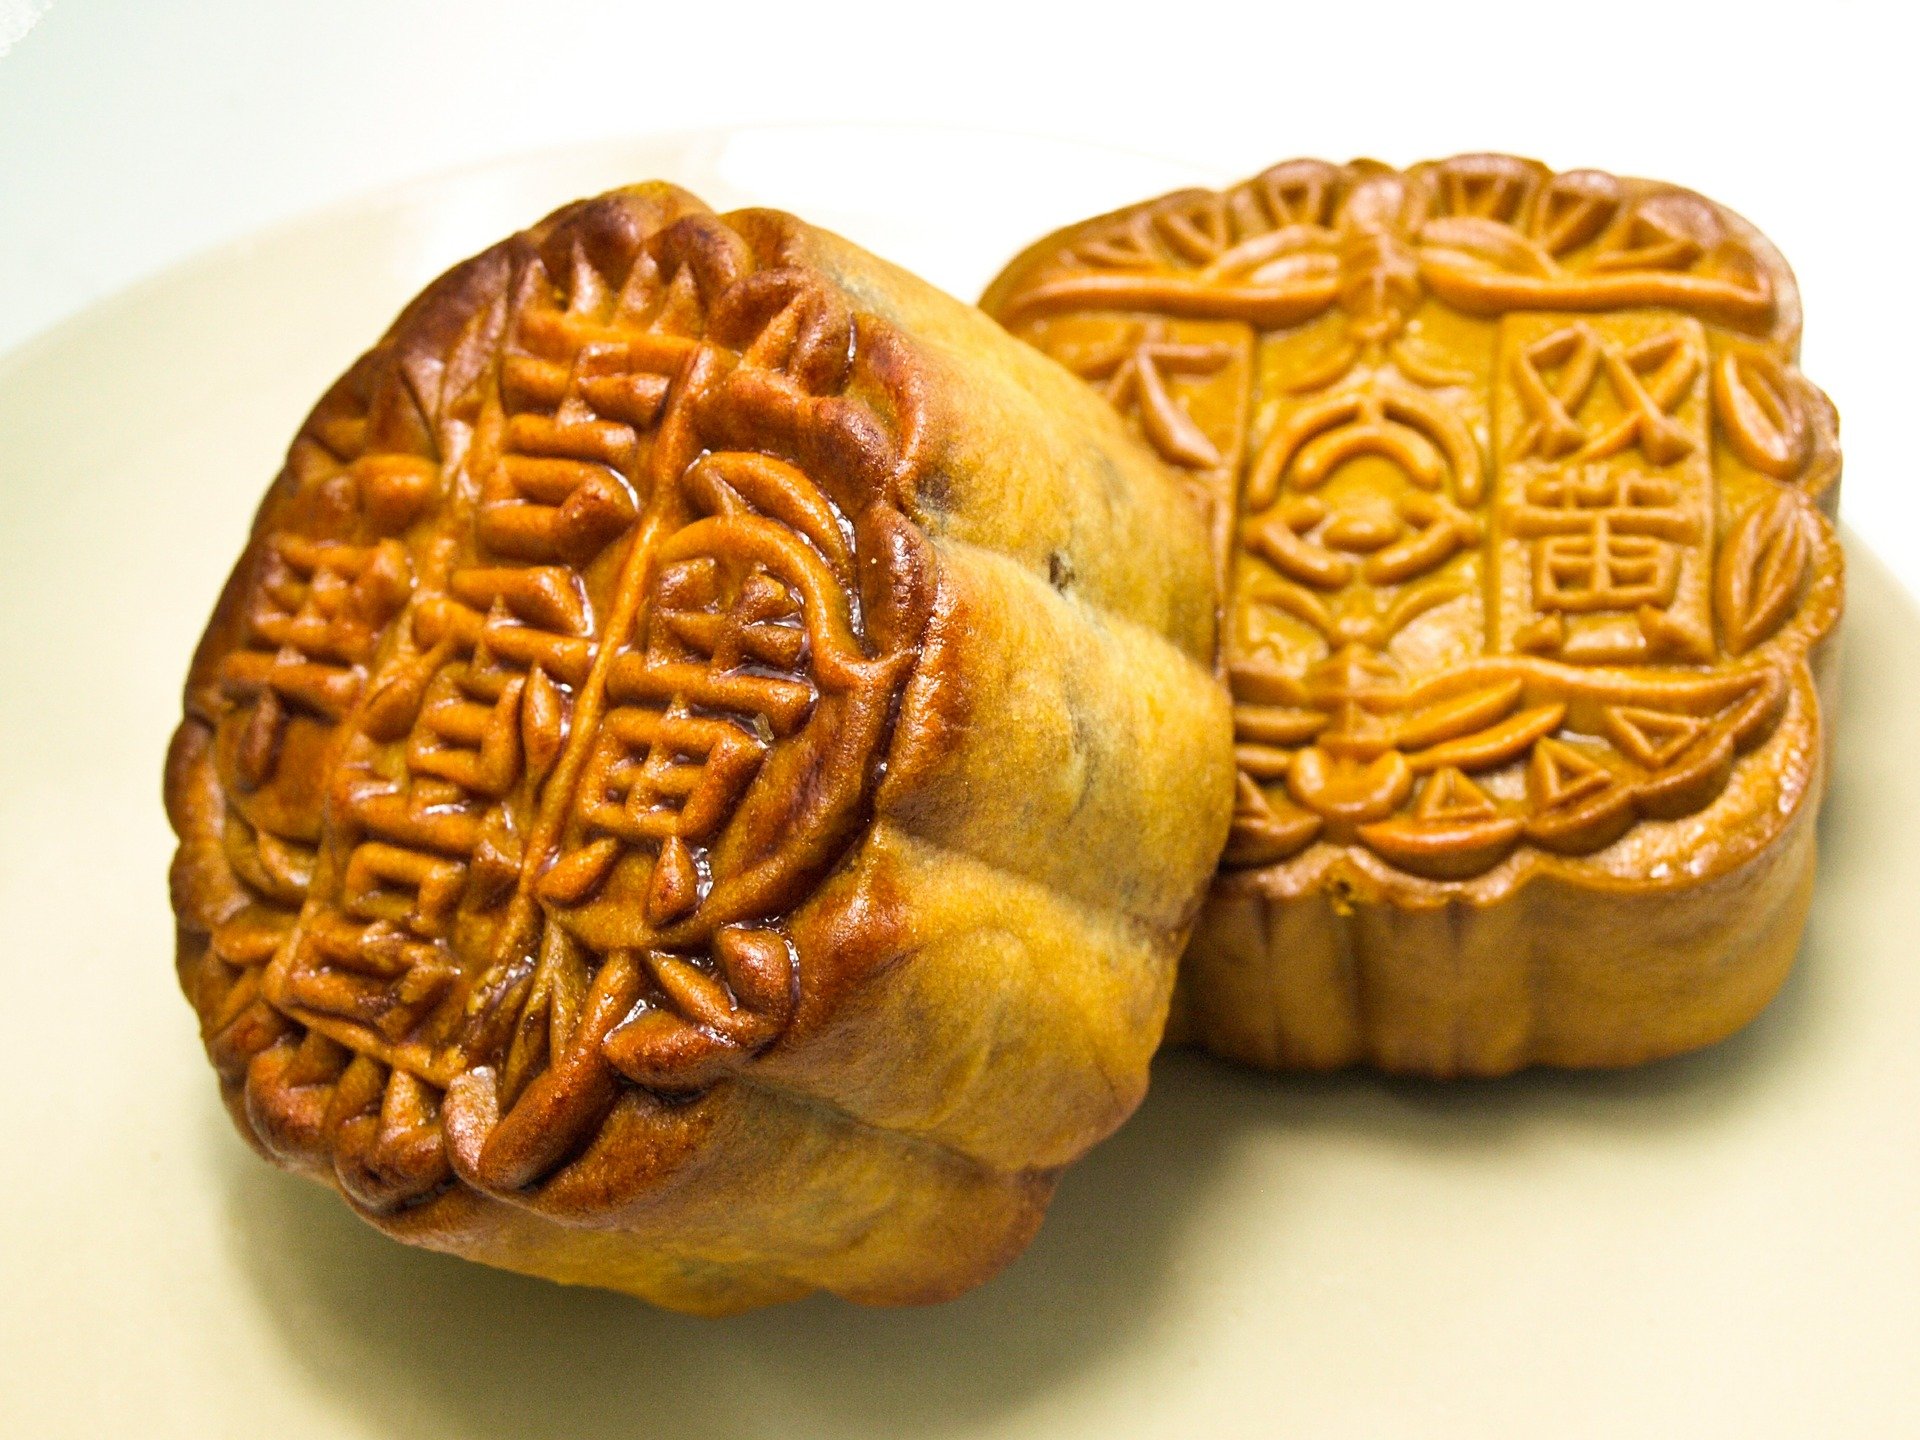 13 places to find Mooncakes in New York City